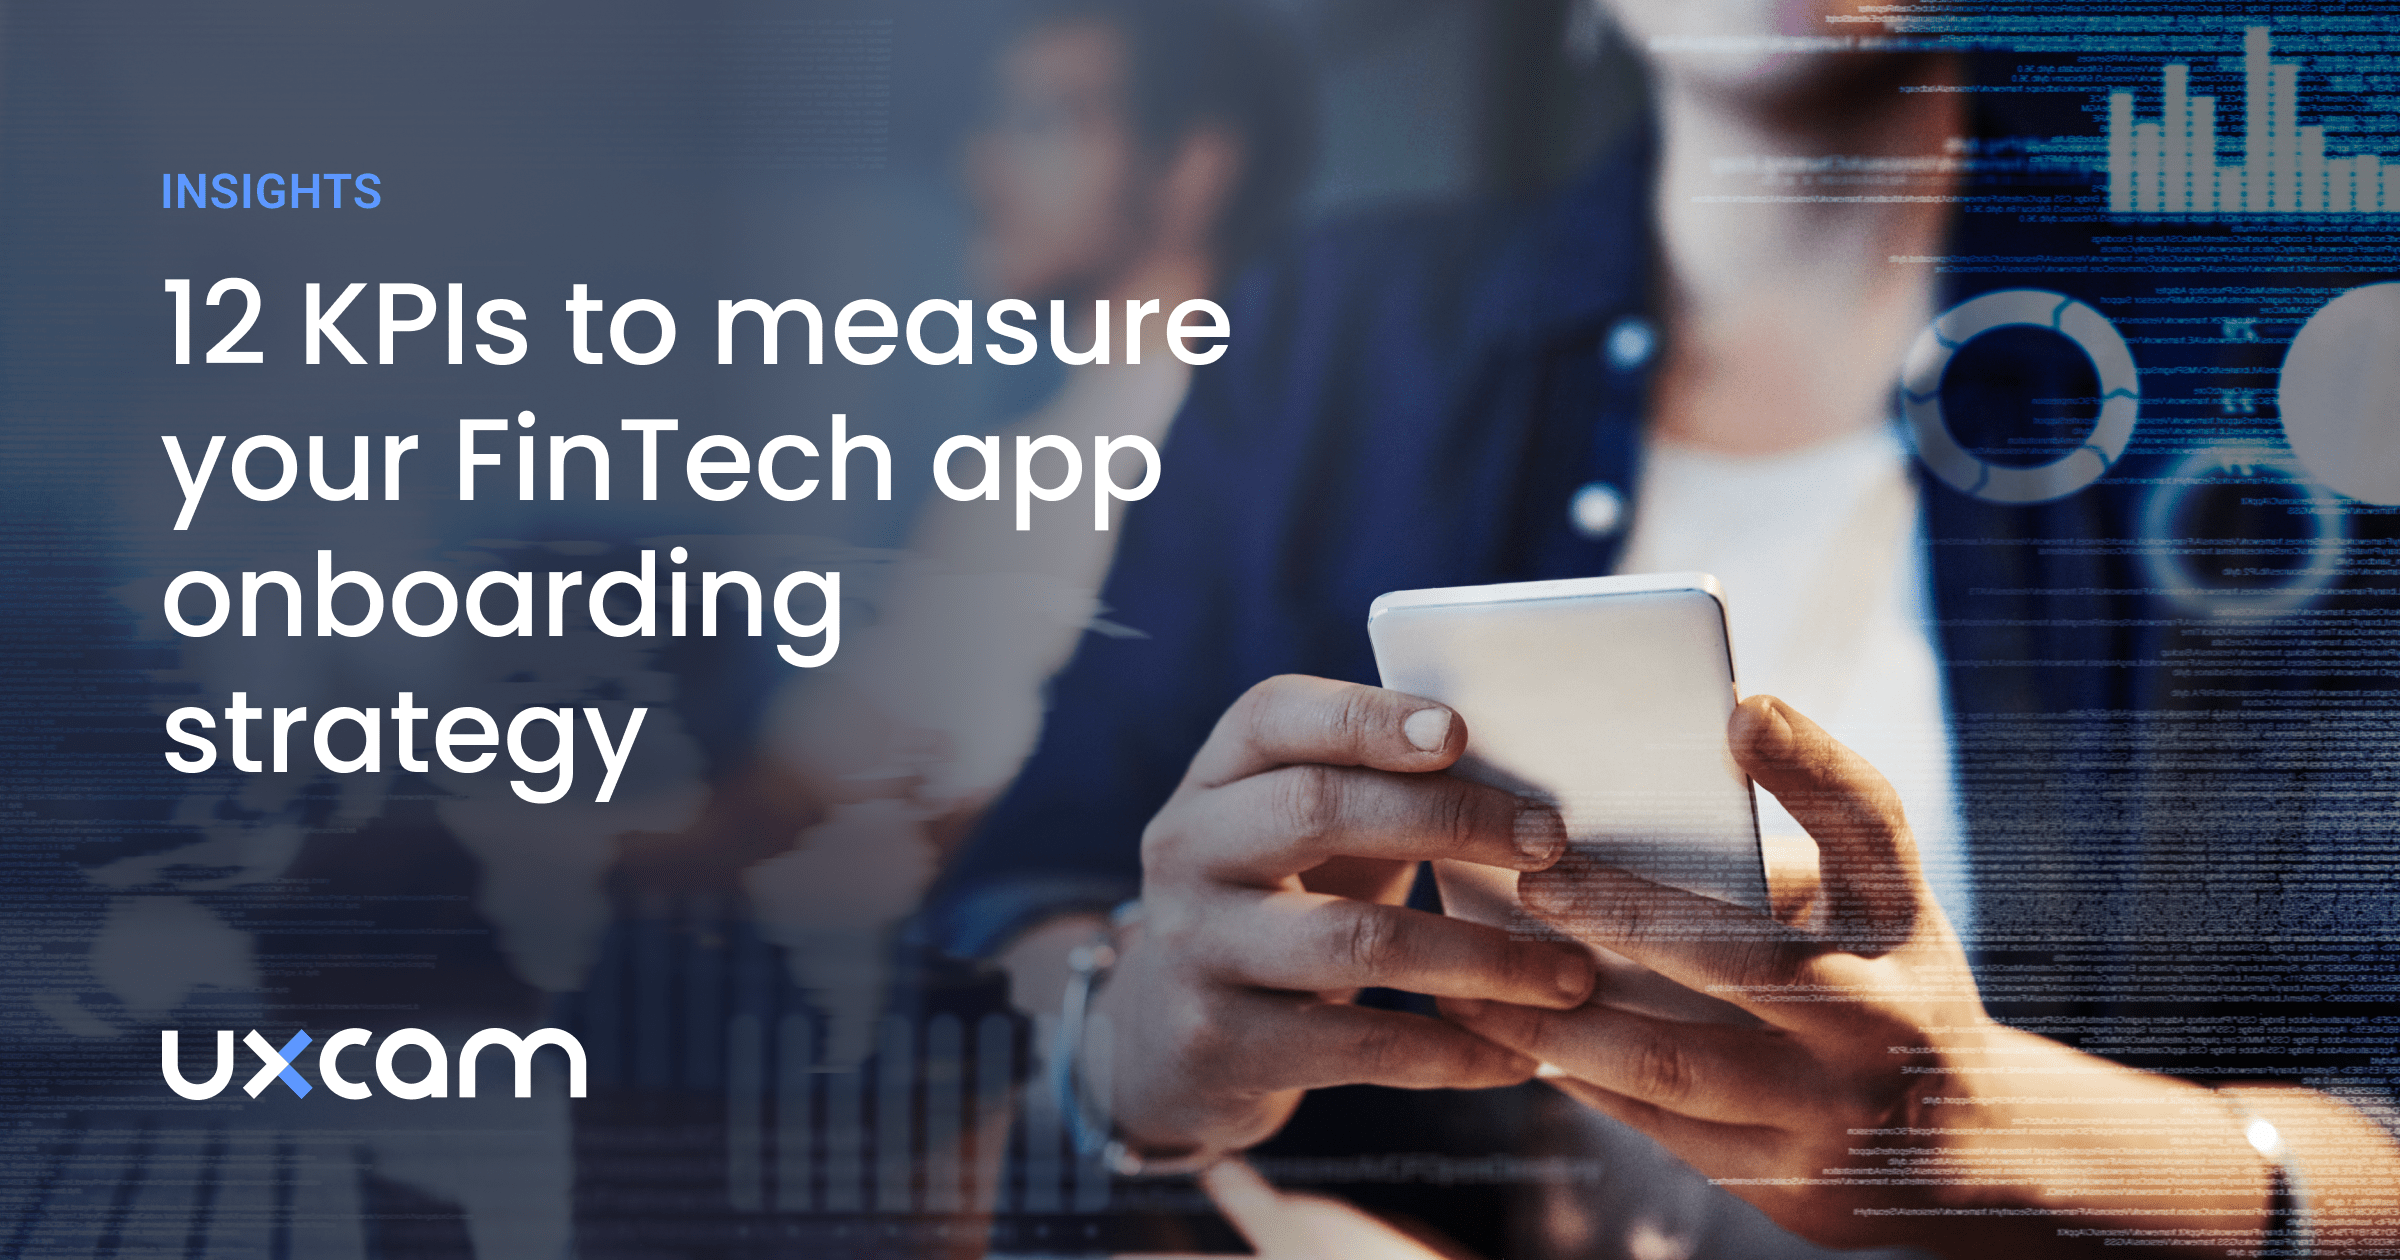 12 KPIs to measure your fintech onboarding